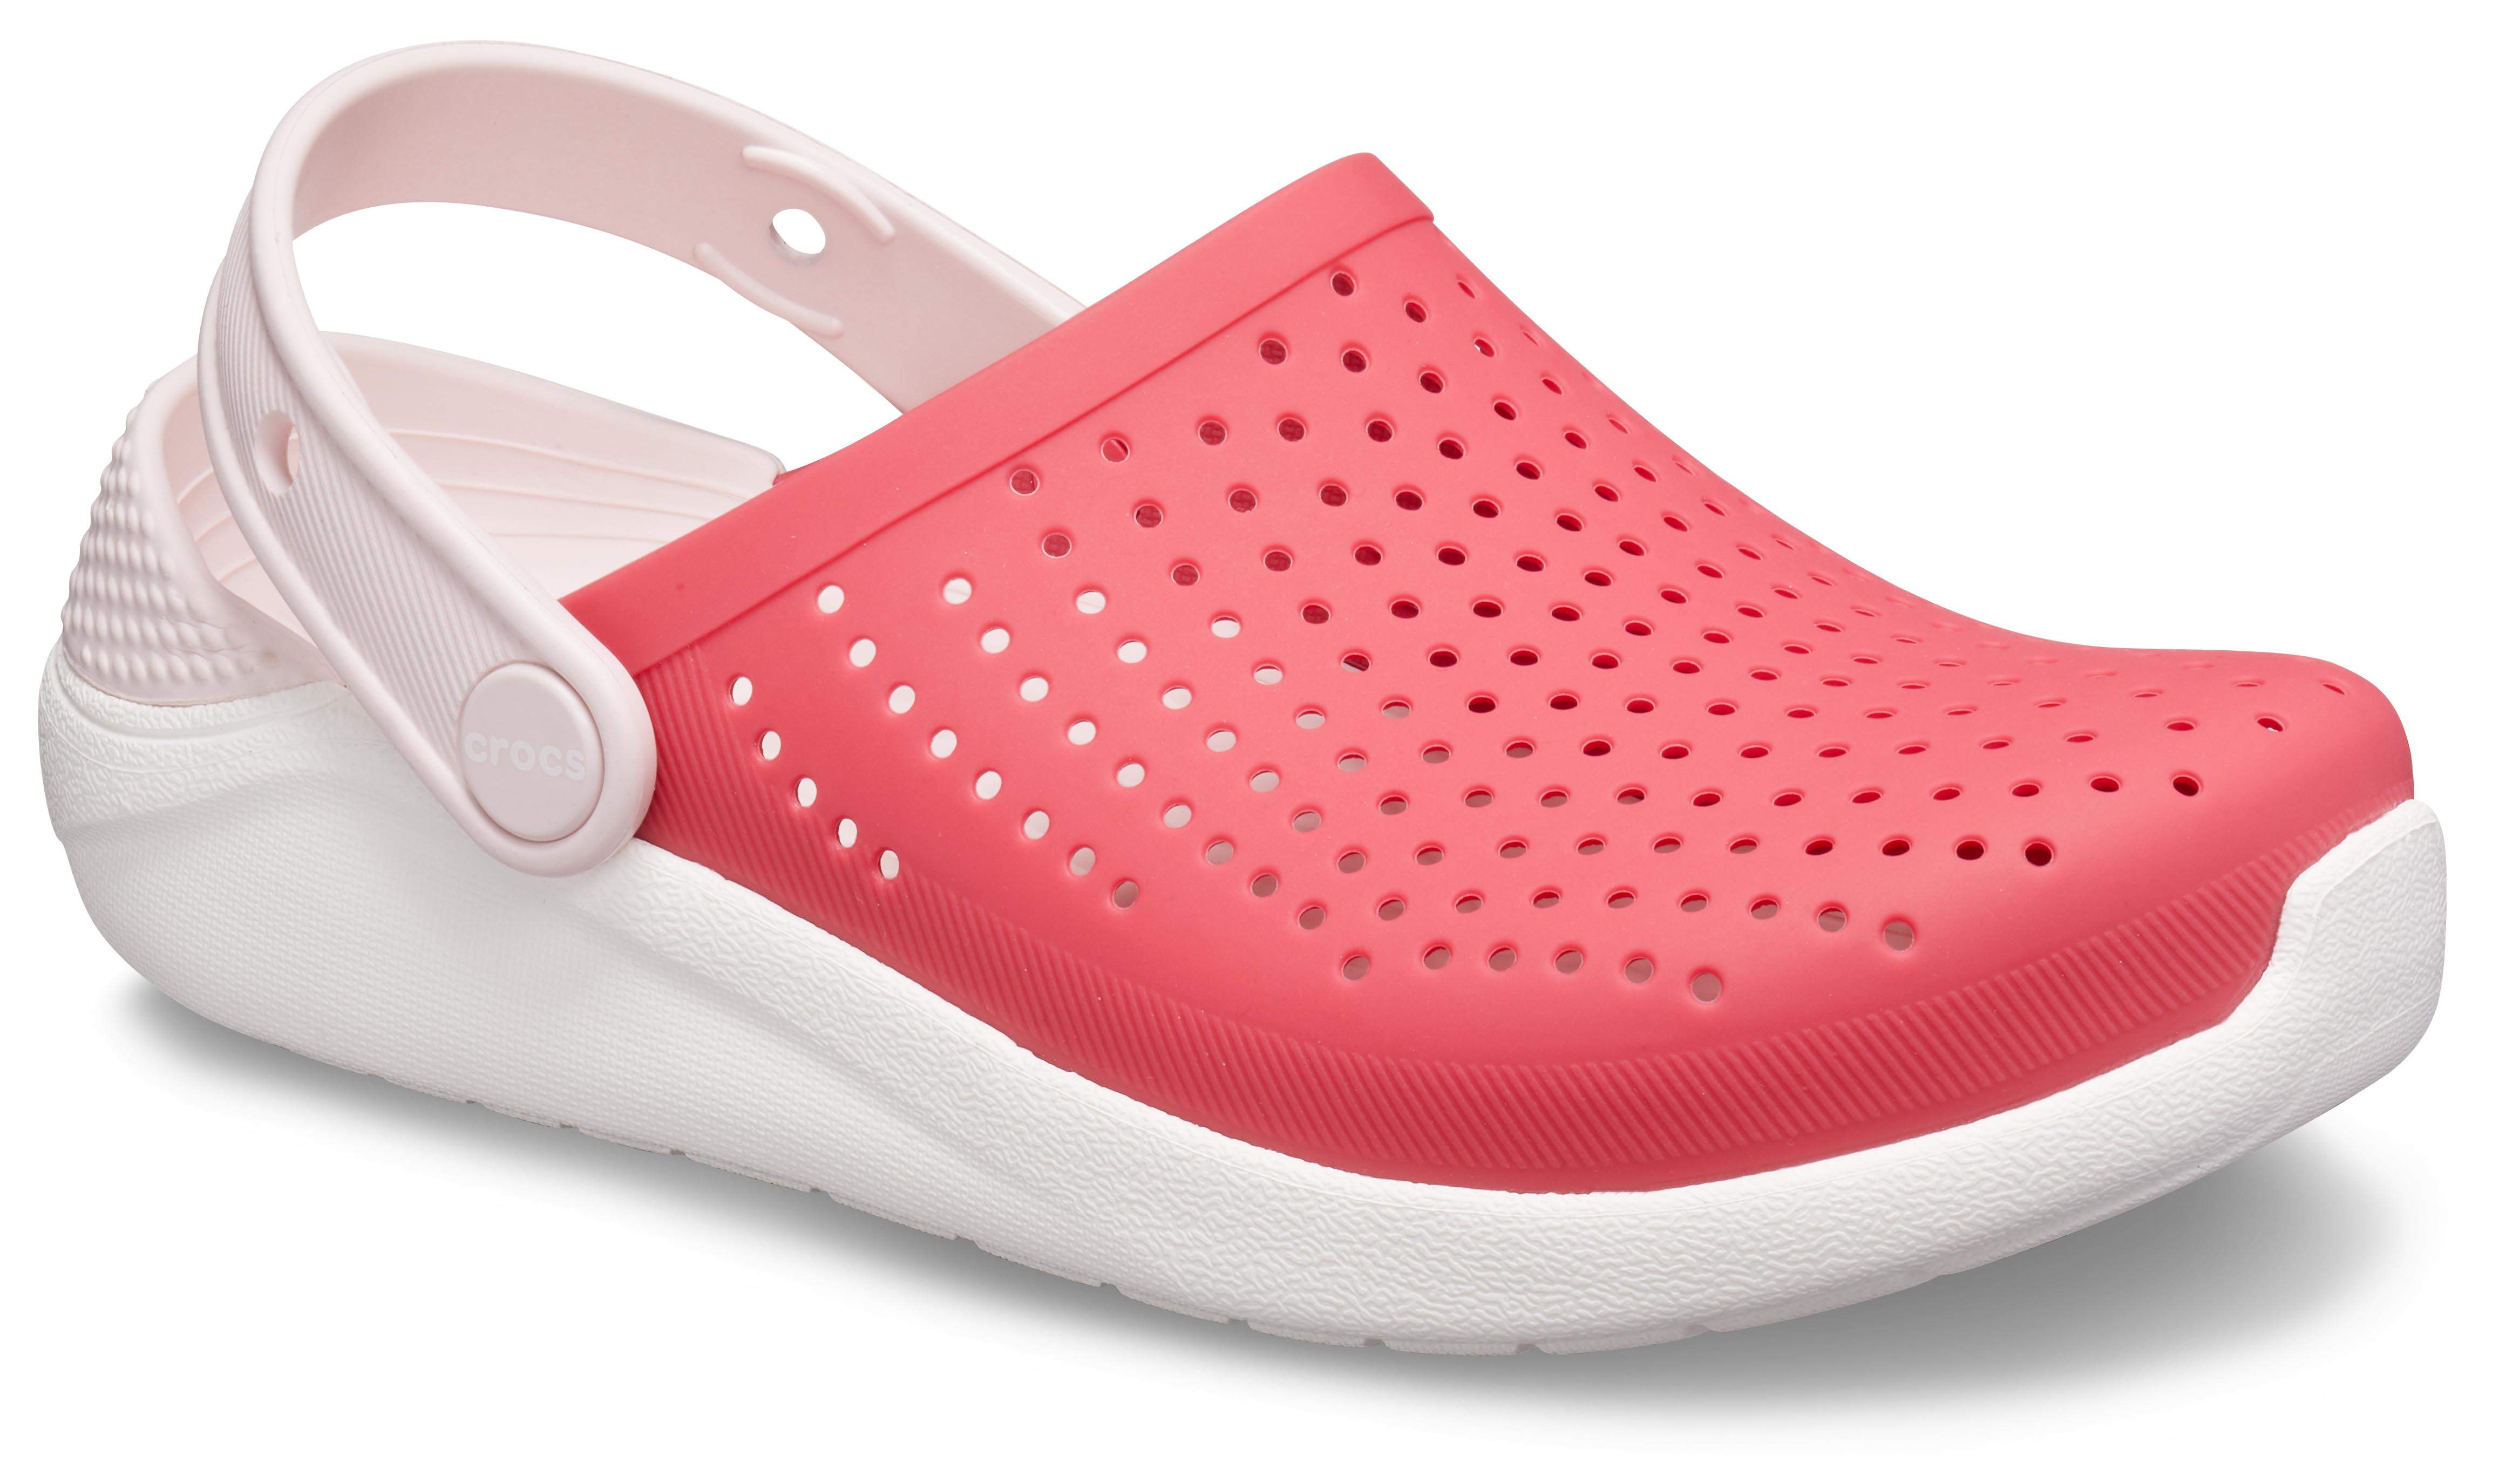 new insoles for crocs